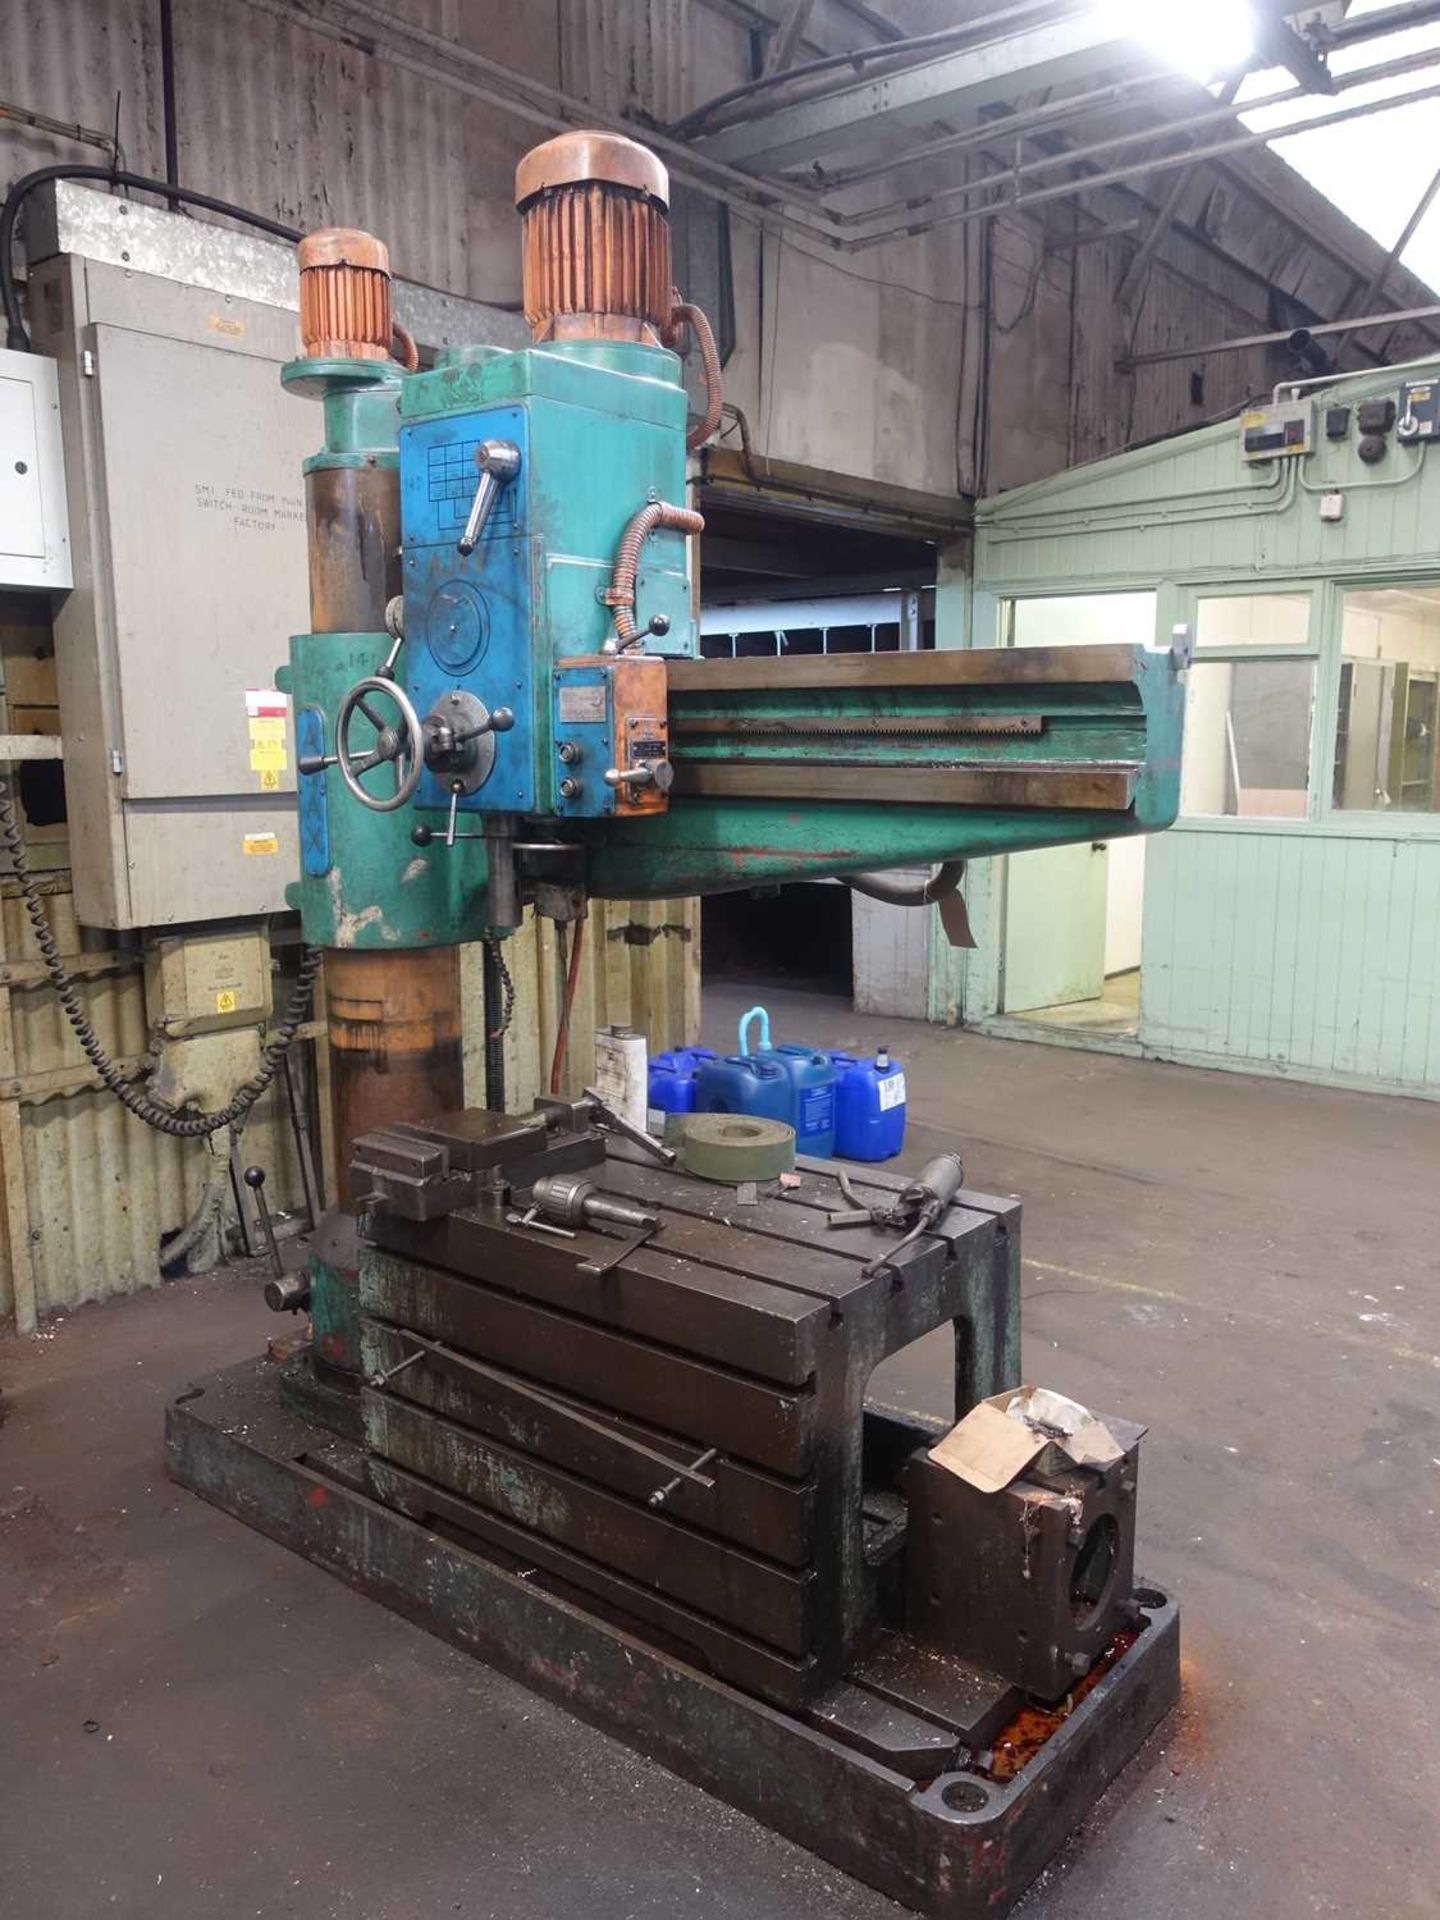 +VAT Ajax type 16493 radial drill with cube and 6" machine vice, serial number: 7977